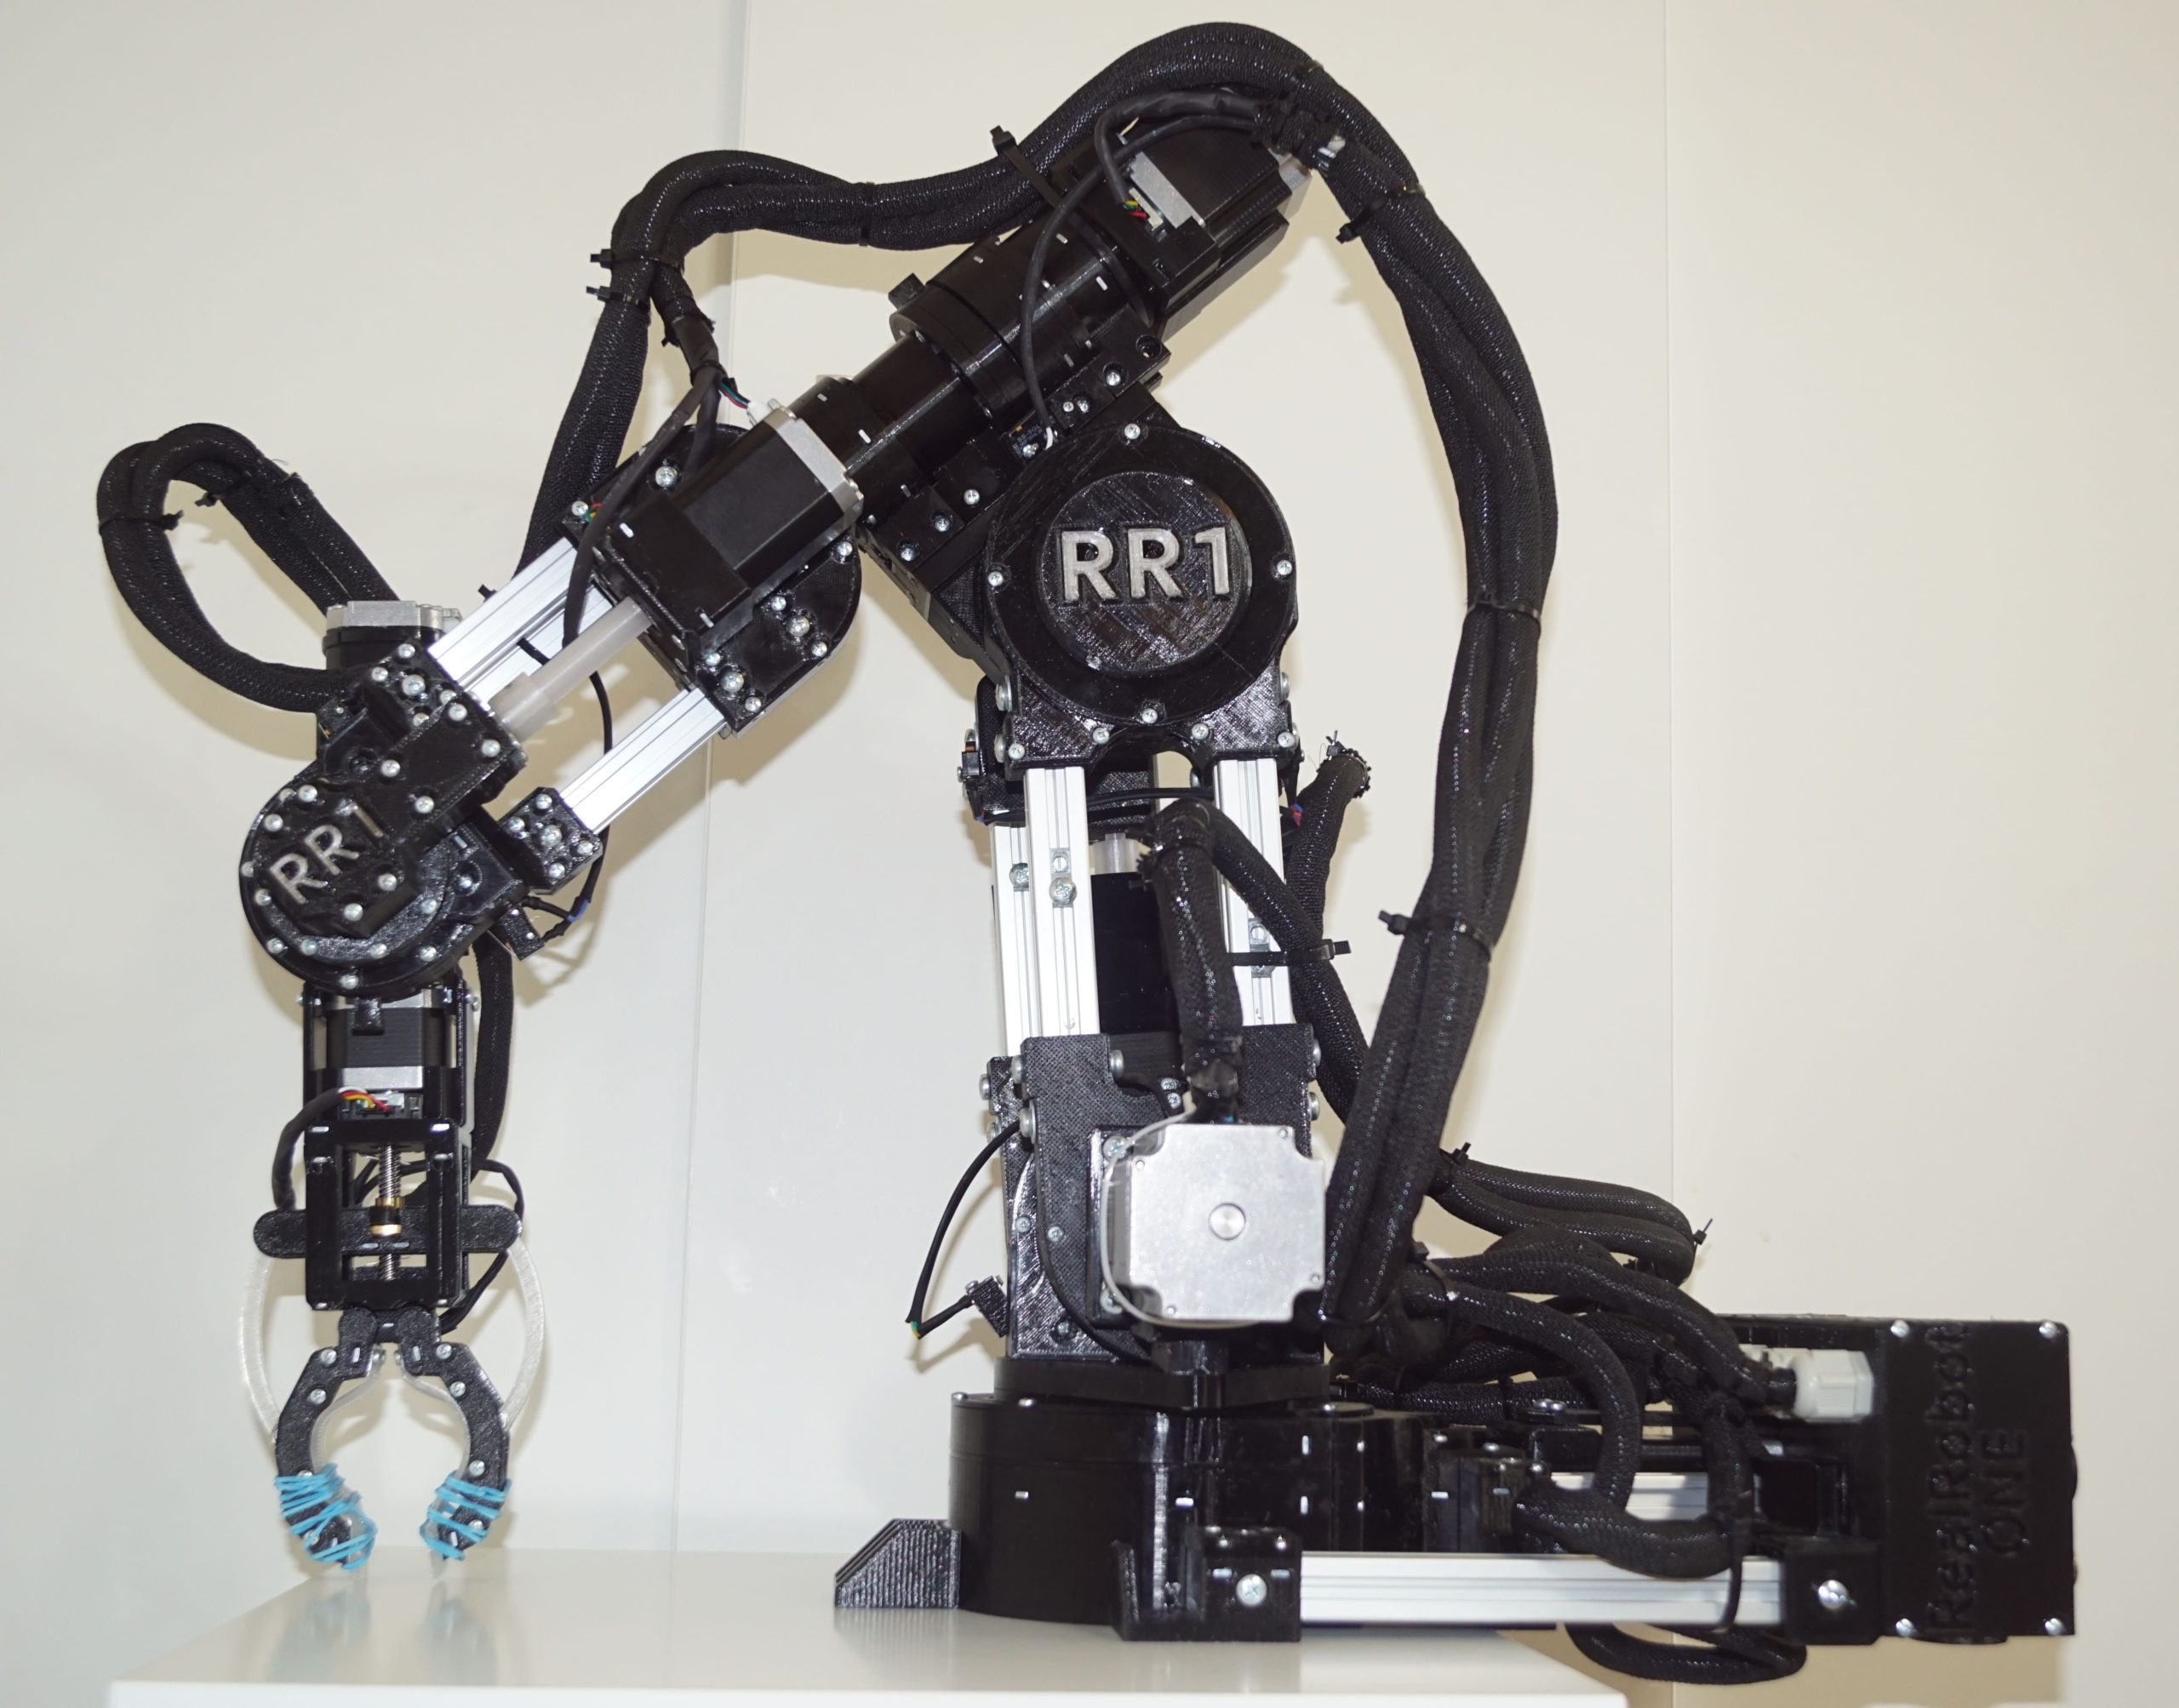 Real Robot One is a high performance robotic arm that you can build yourself